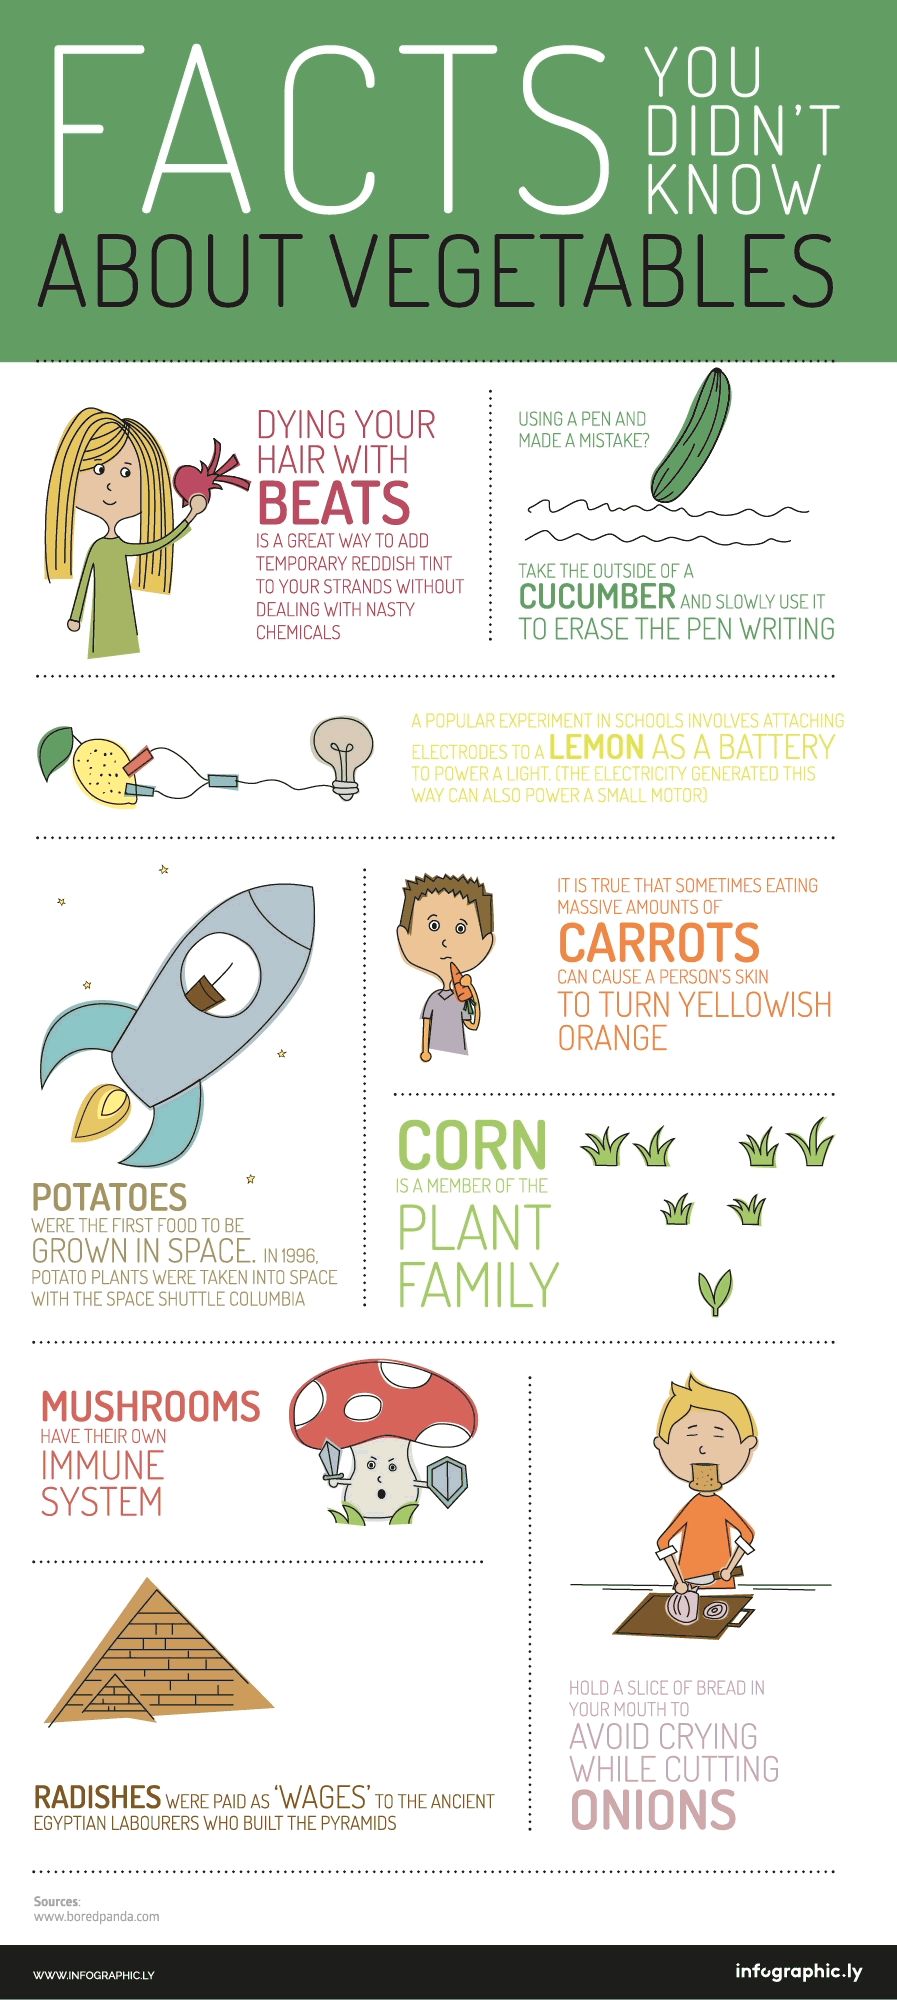 Facts About Vegetables Infographic